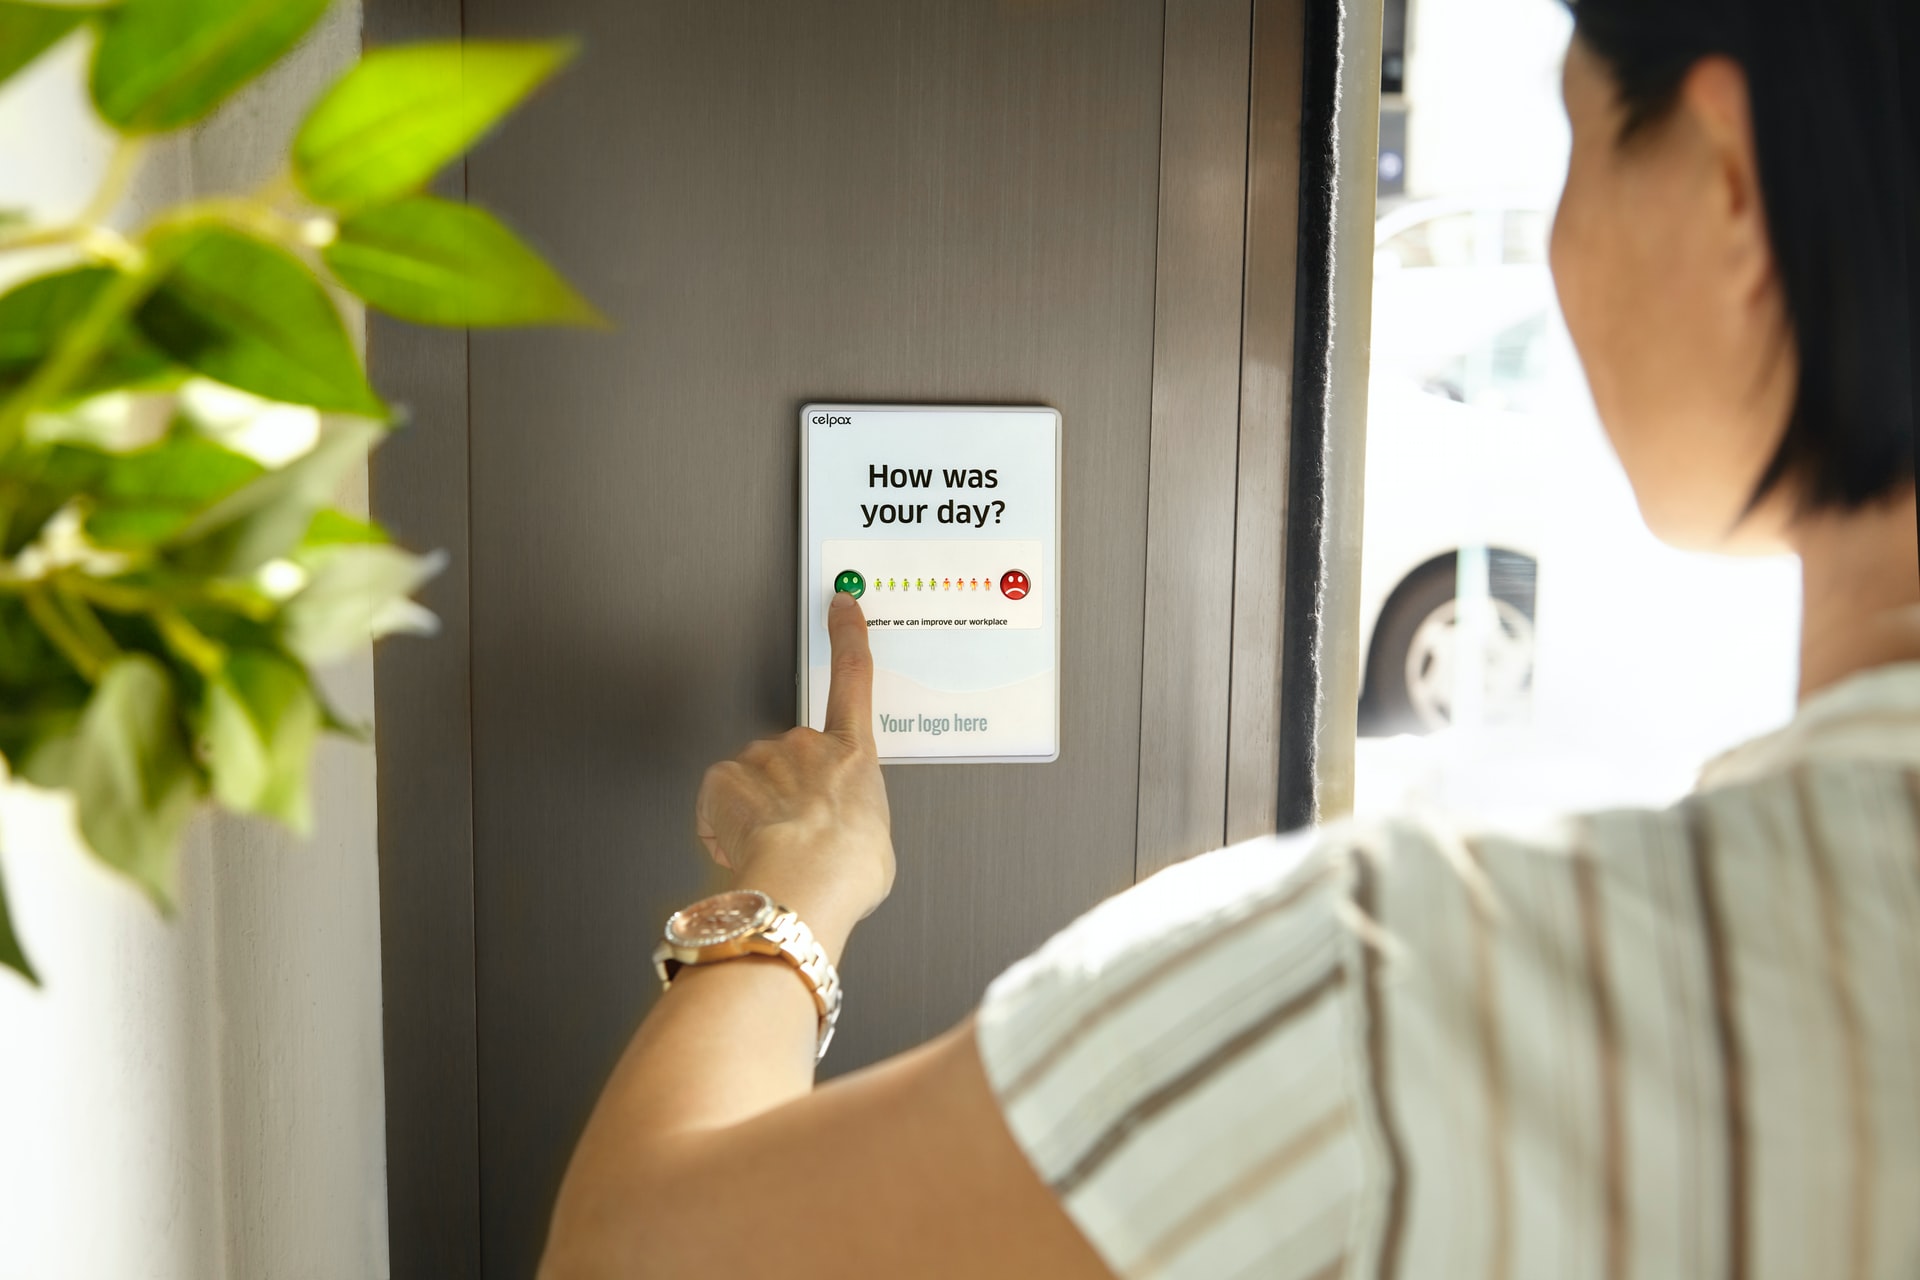 Female employee pressing a green button to give feedback to a survey